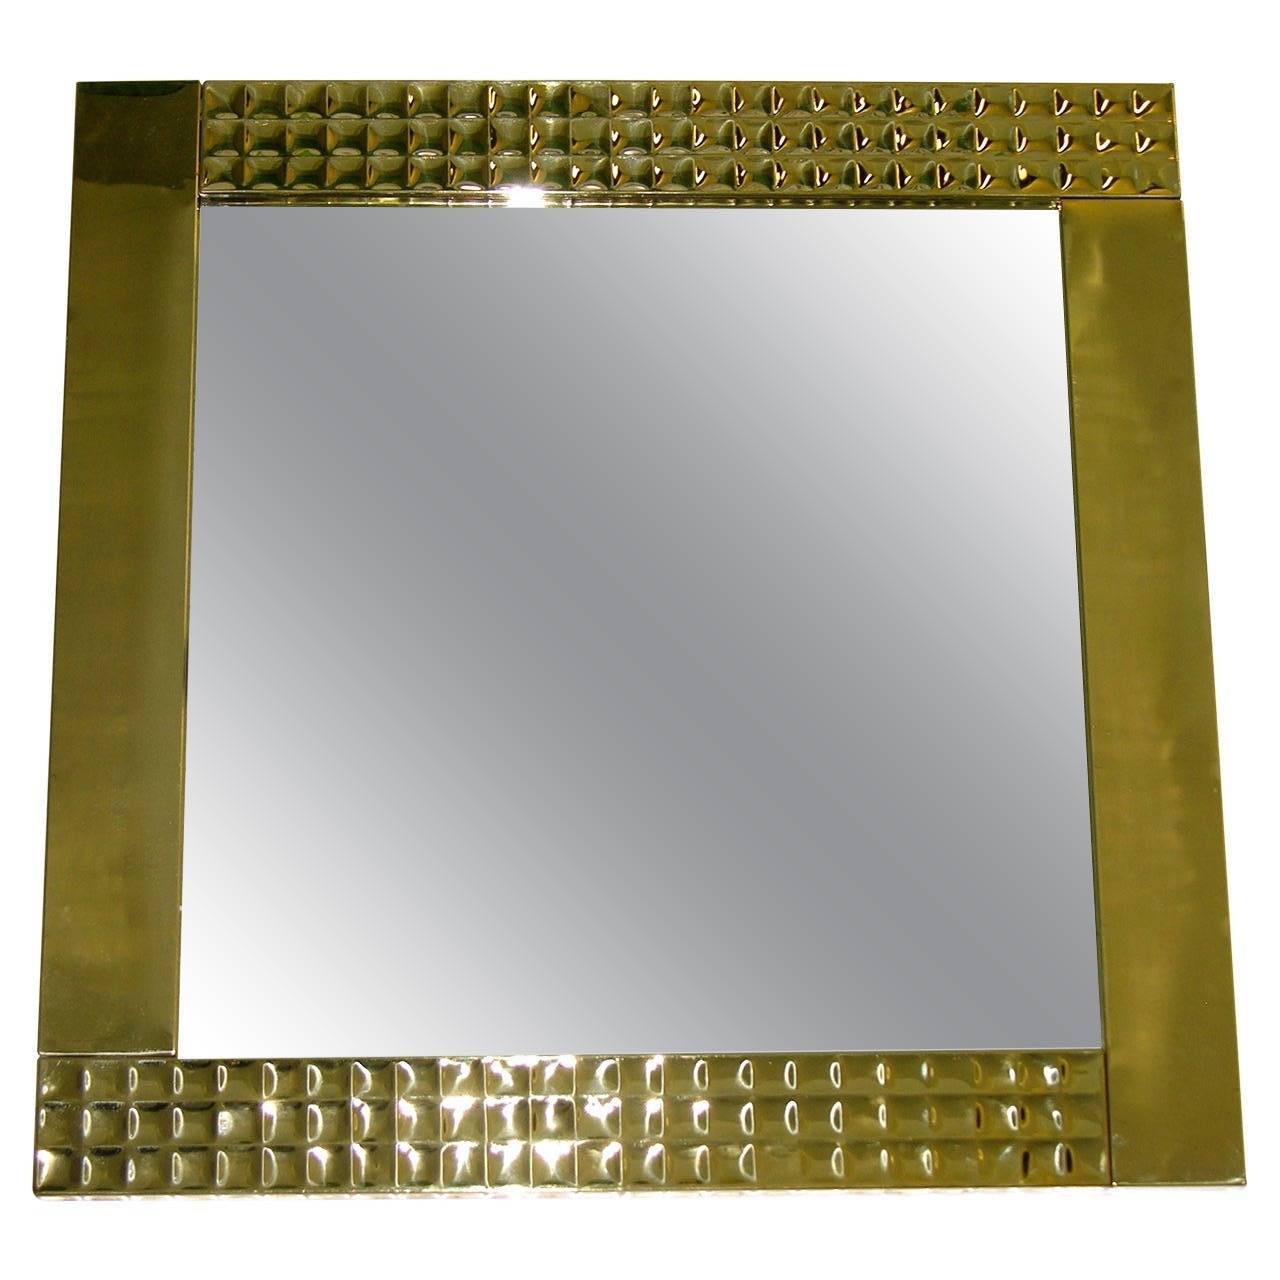 A very decorative pair of Italian mirrors handcrafted with a squared brass frame, decorated in a precious hammered pattern on two opposite sides that creates diamond like reflections. Can be displayed either way.
Two are available.